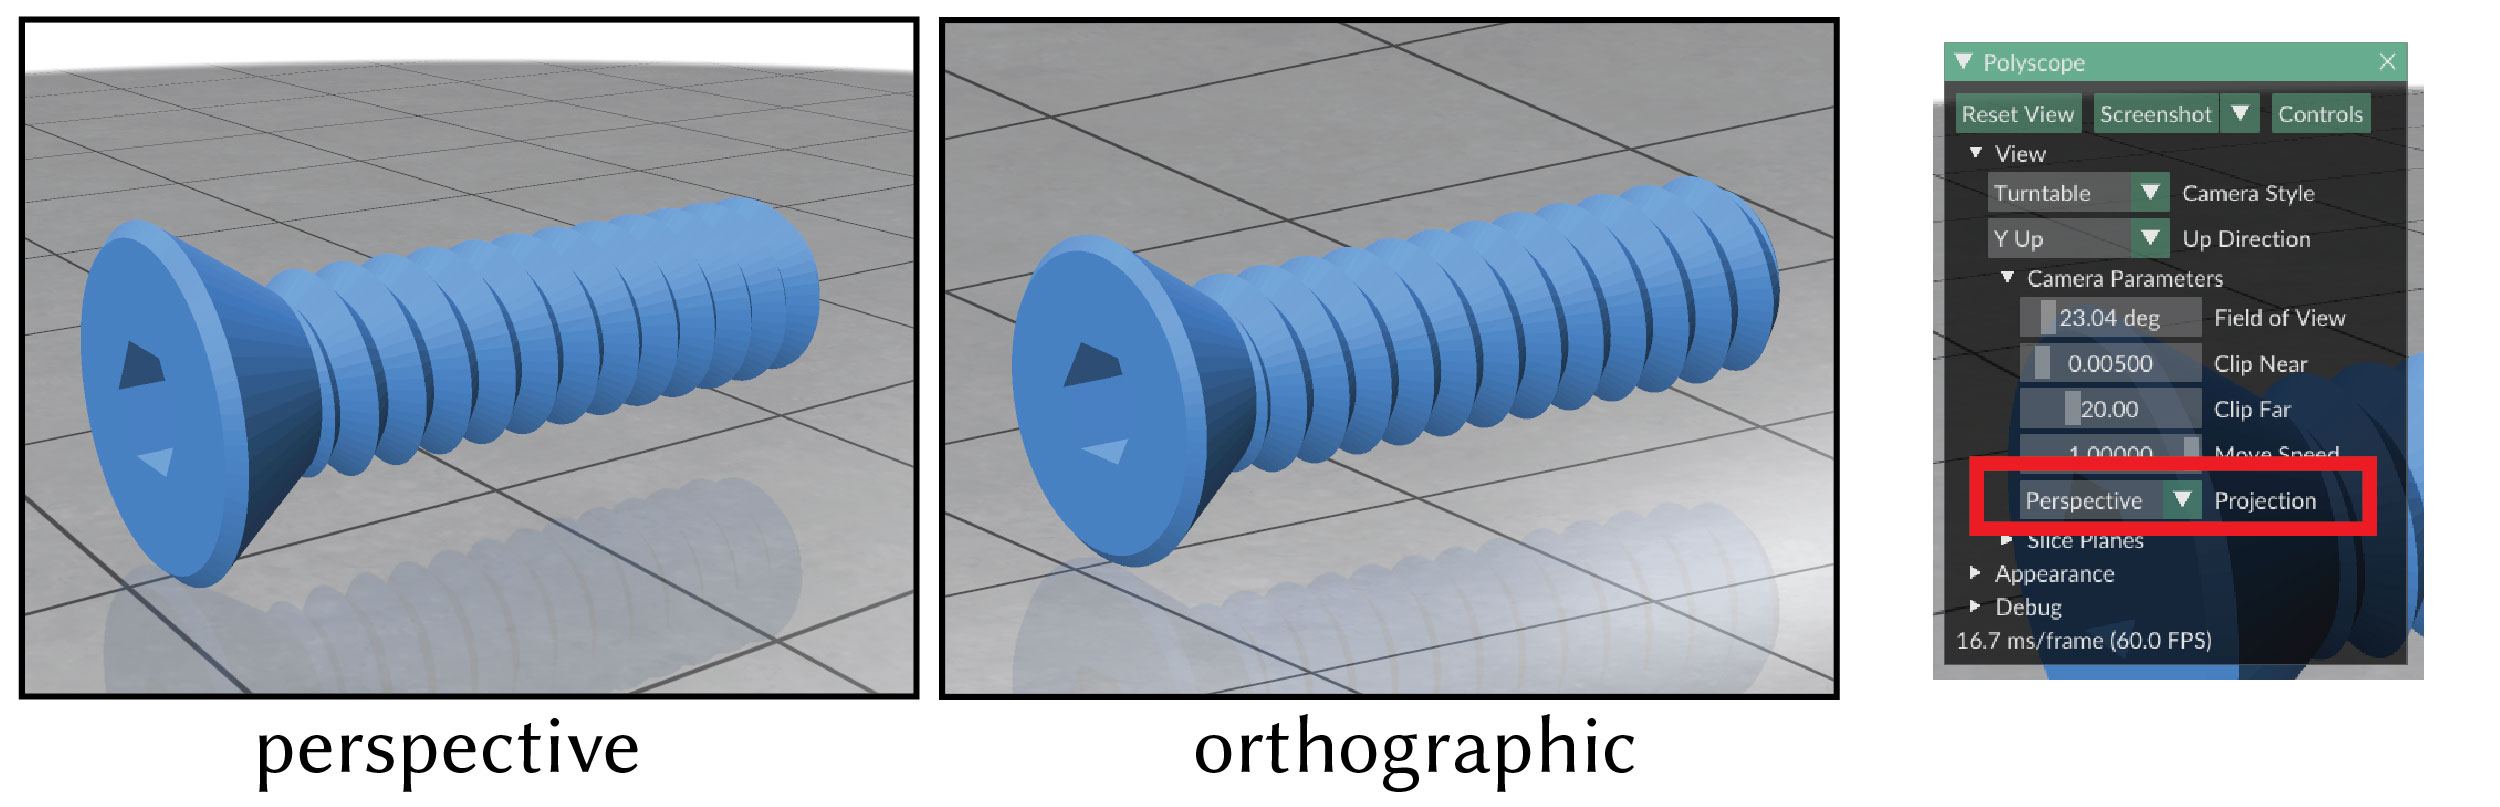 image of perspective and orthographic projection